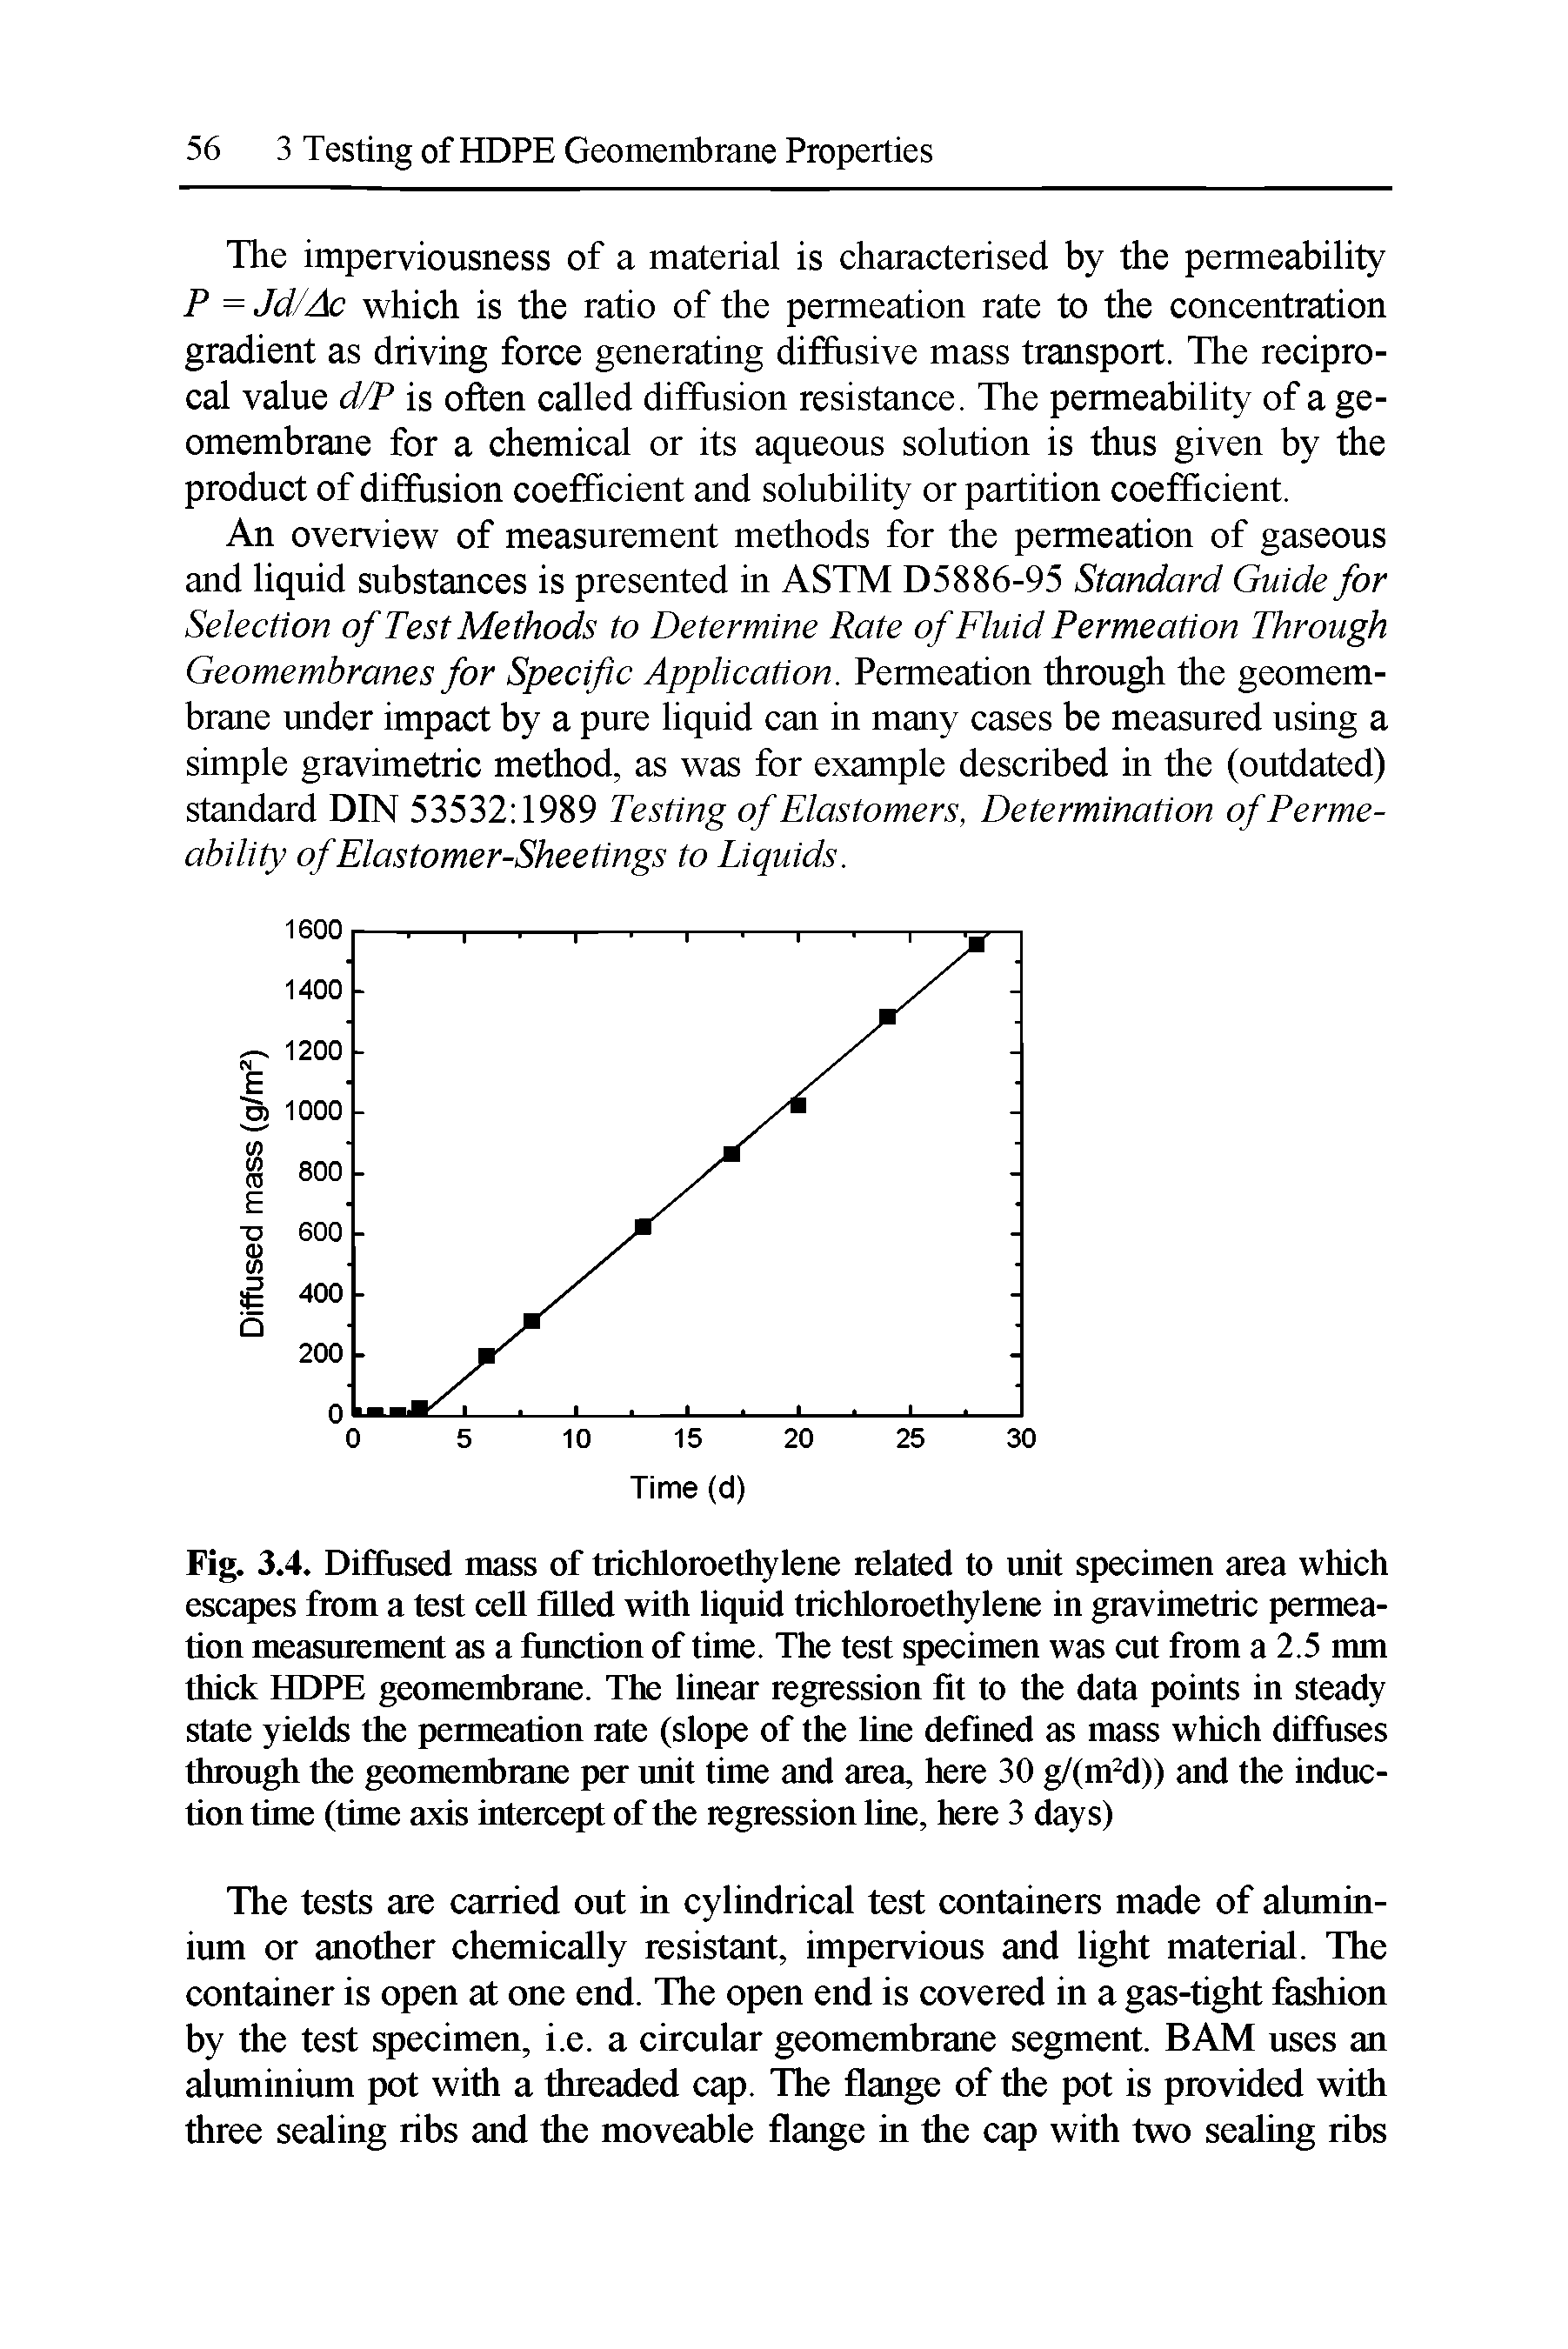 Fig. 3.4. Diffused mass of trichloroethylene related to unit specimen area which escapes from a test cell filled with liquid trichloroethylene in gravimetric permeation measurement as a function of time. The test specimen was cut from a 2.5 mm thick HDPE geomembrane. The linear regression fit to the data points in steady state yields the permeation rate (slope of the line defined as mass which diffuses through the geomembrane per unit time and area, here 30 g/(mM)) and the induction time (time axis intercept of the regression line, here 3 days)...